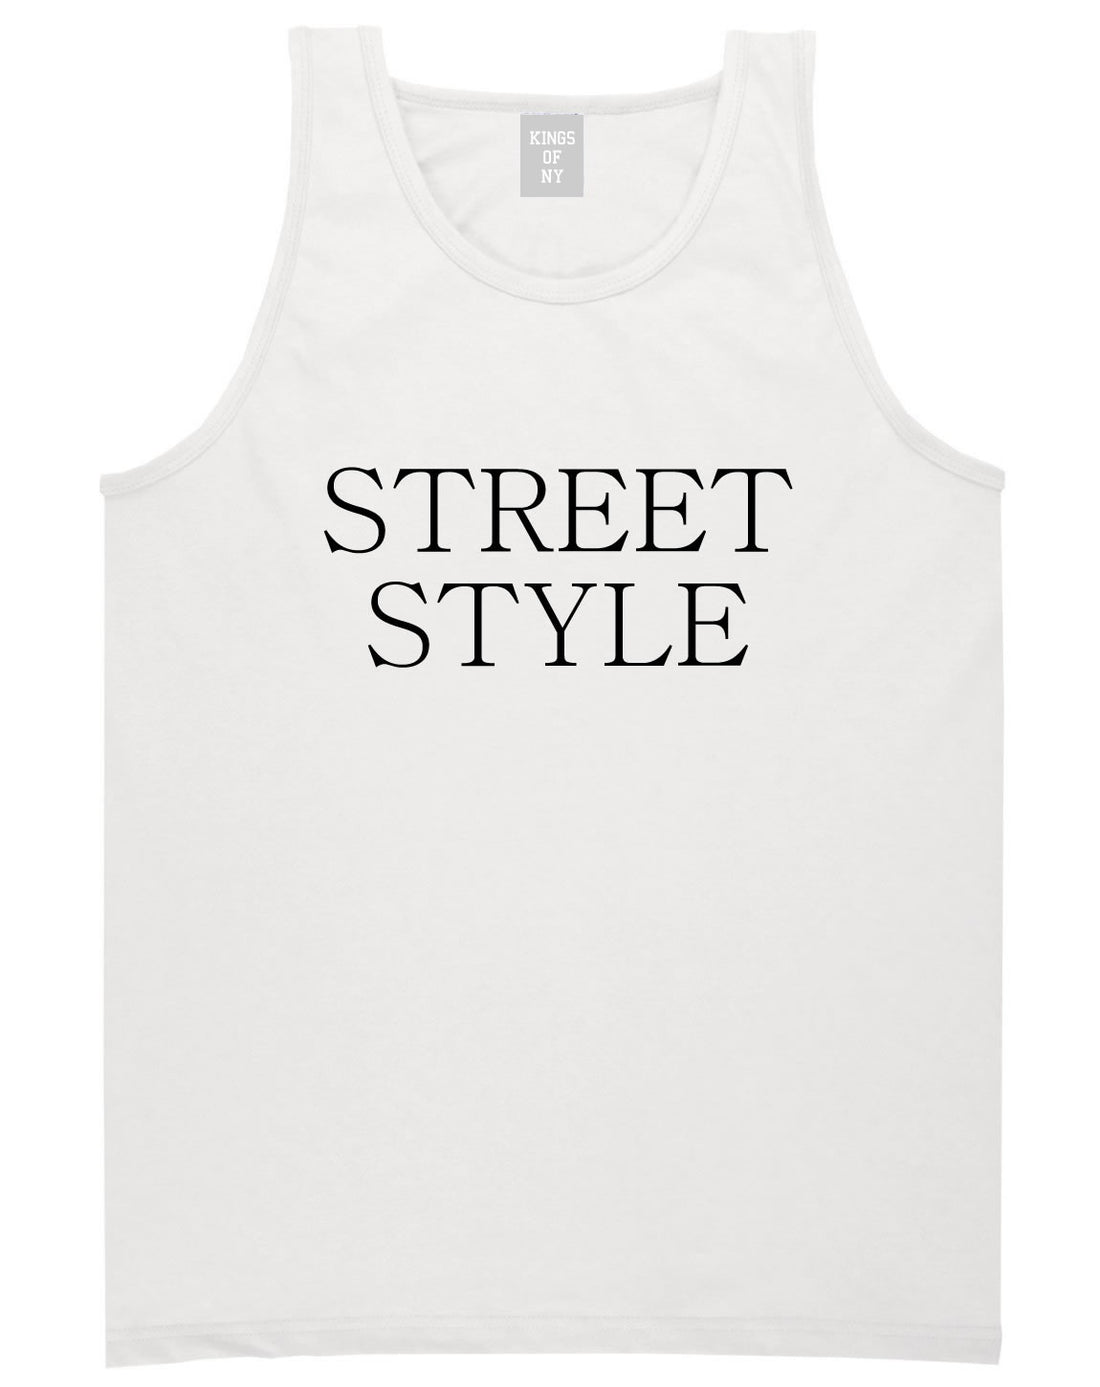 Street Style Photography Tank Top in White by Kings Of NY